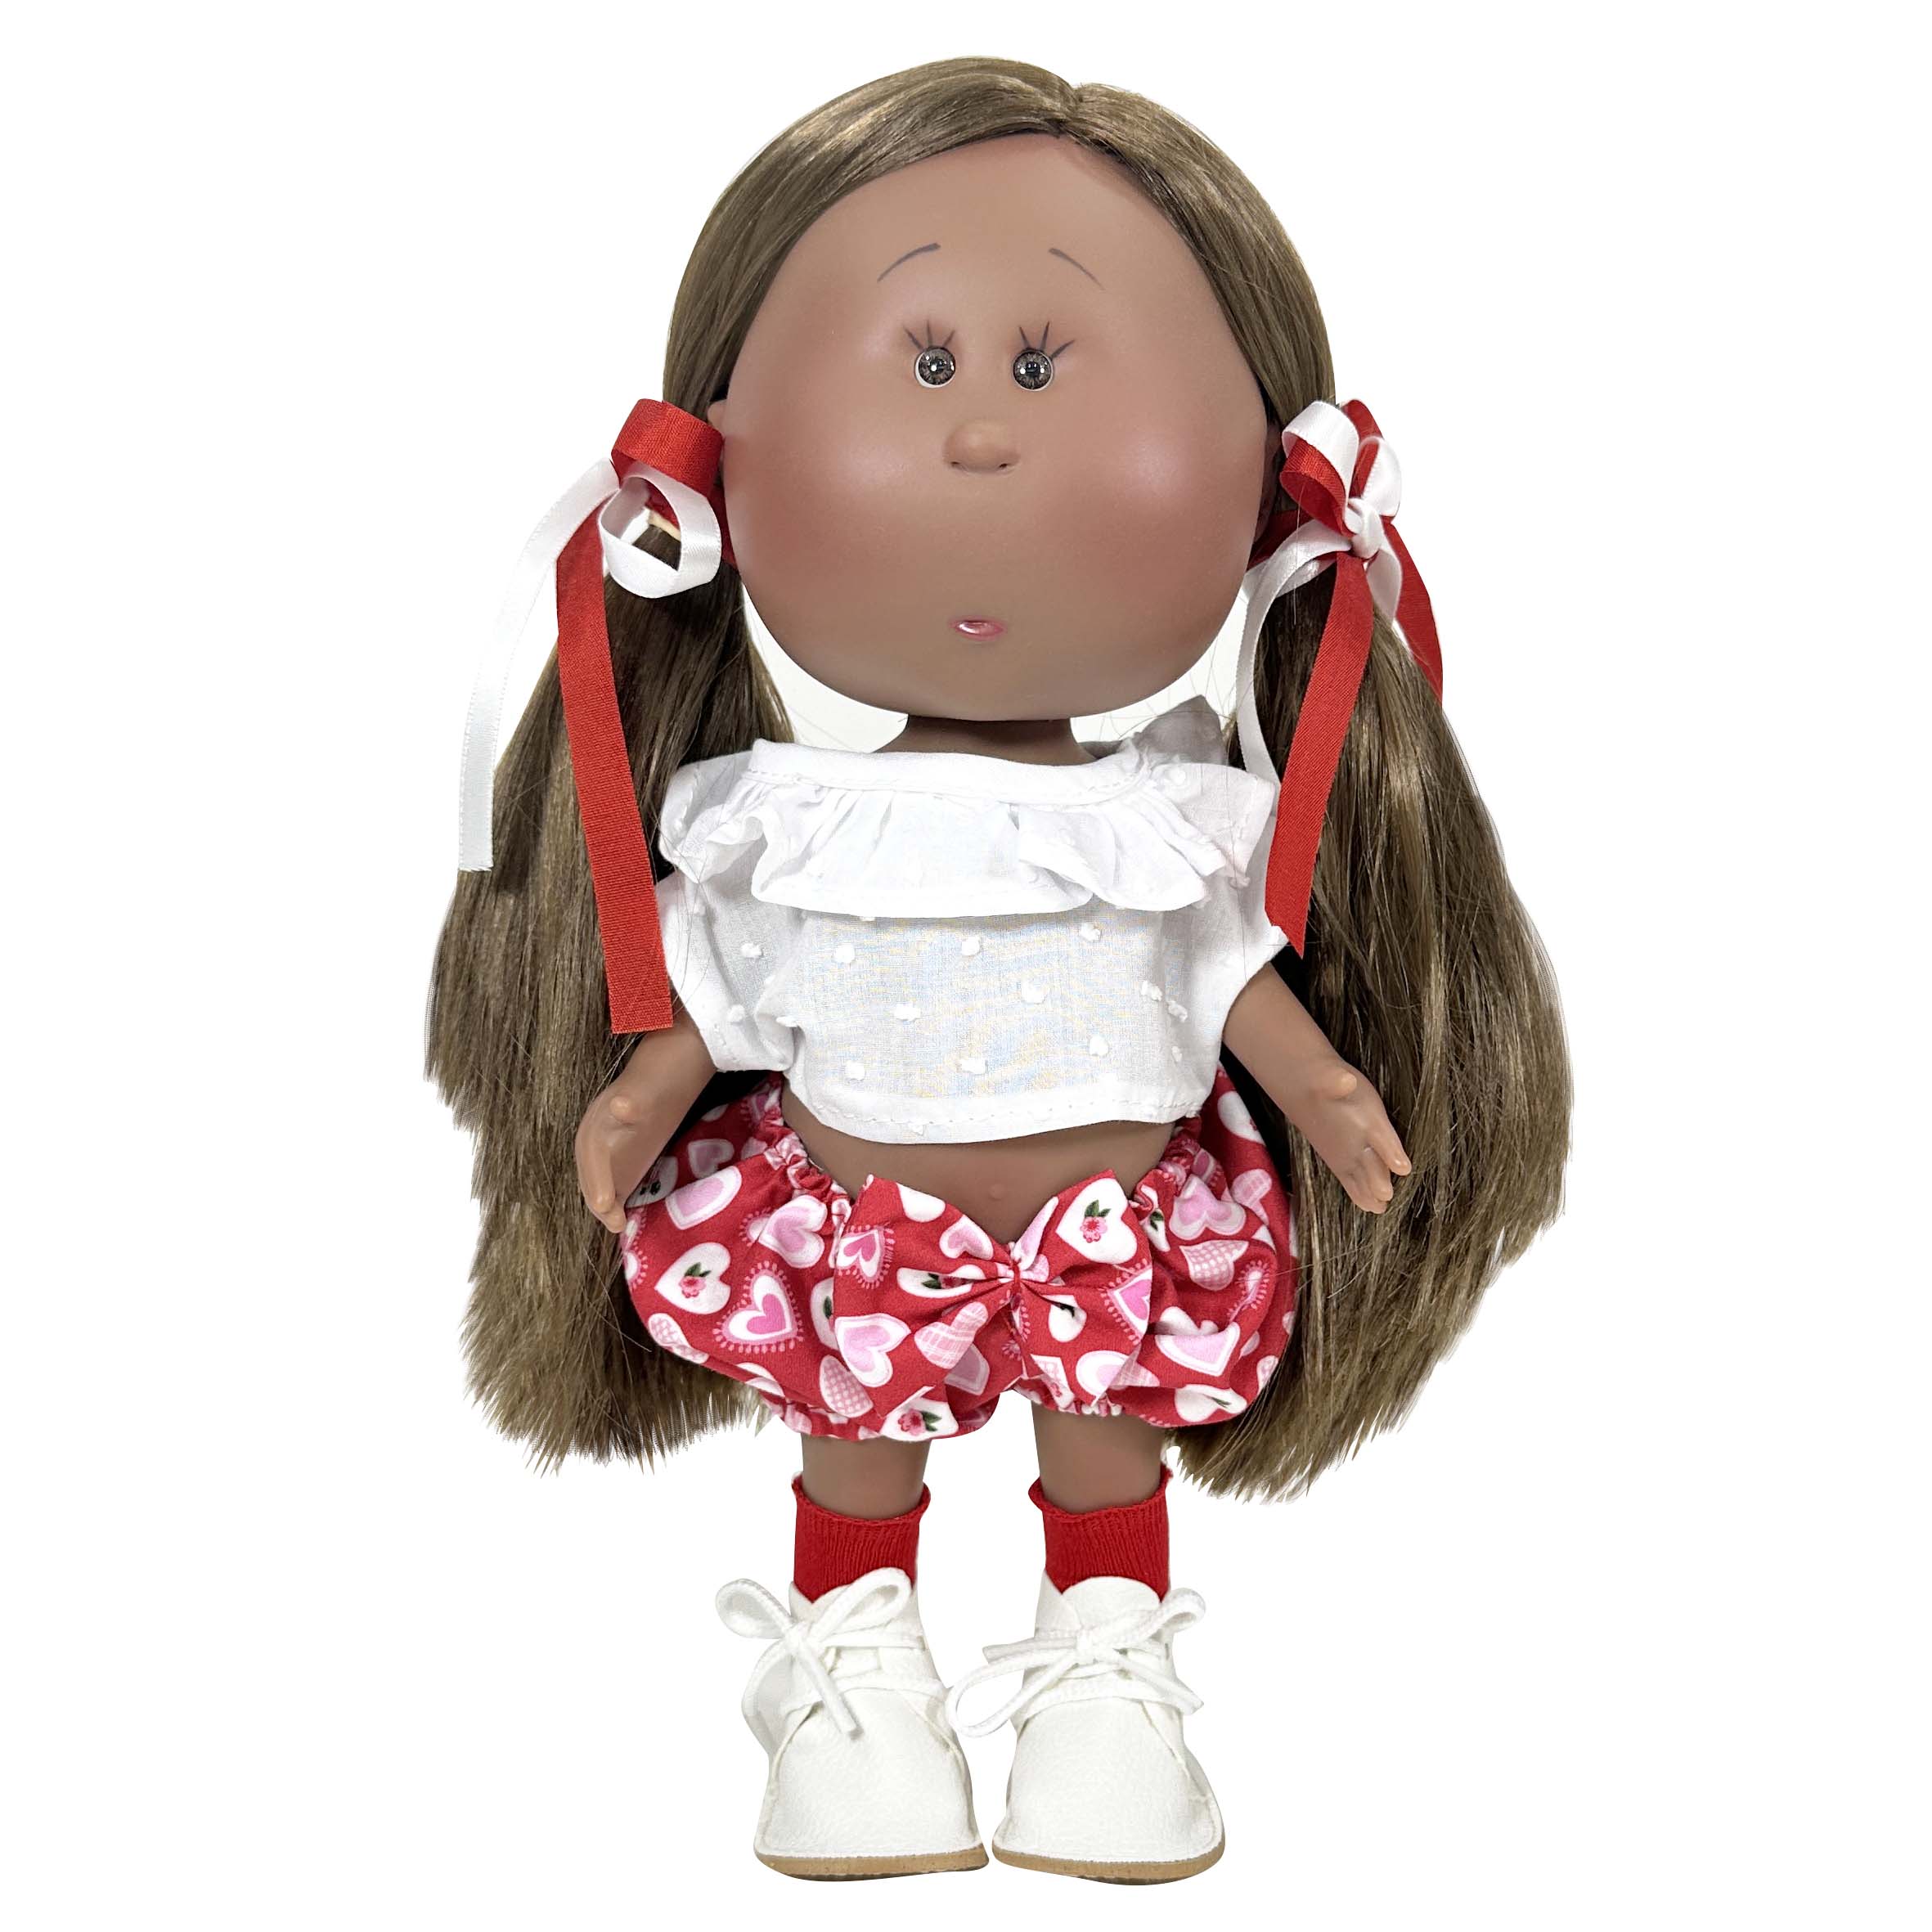 Handcrafted Collectible Mia Strawberry Shortcake Doll (2025_05) by Nines D&